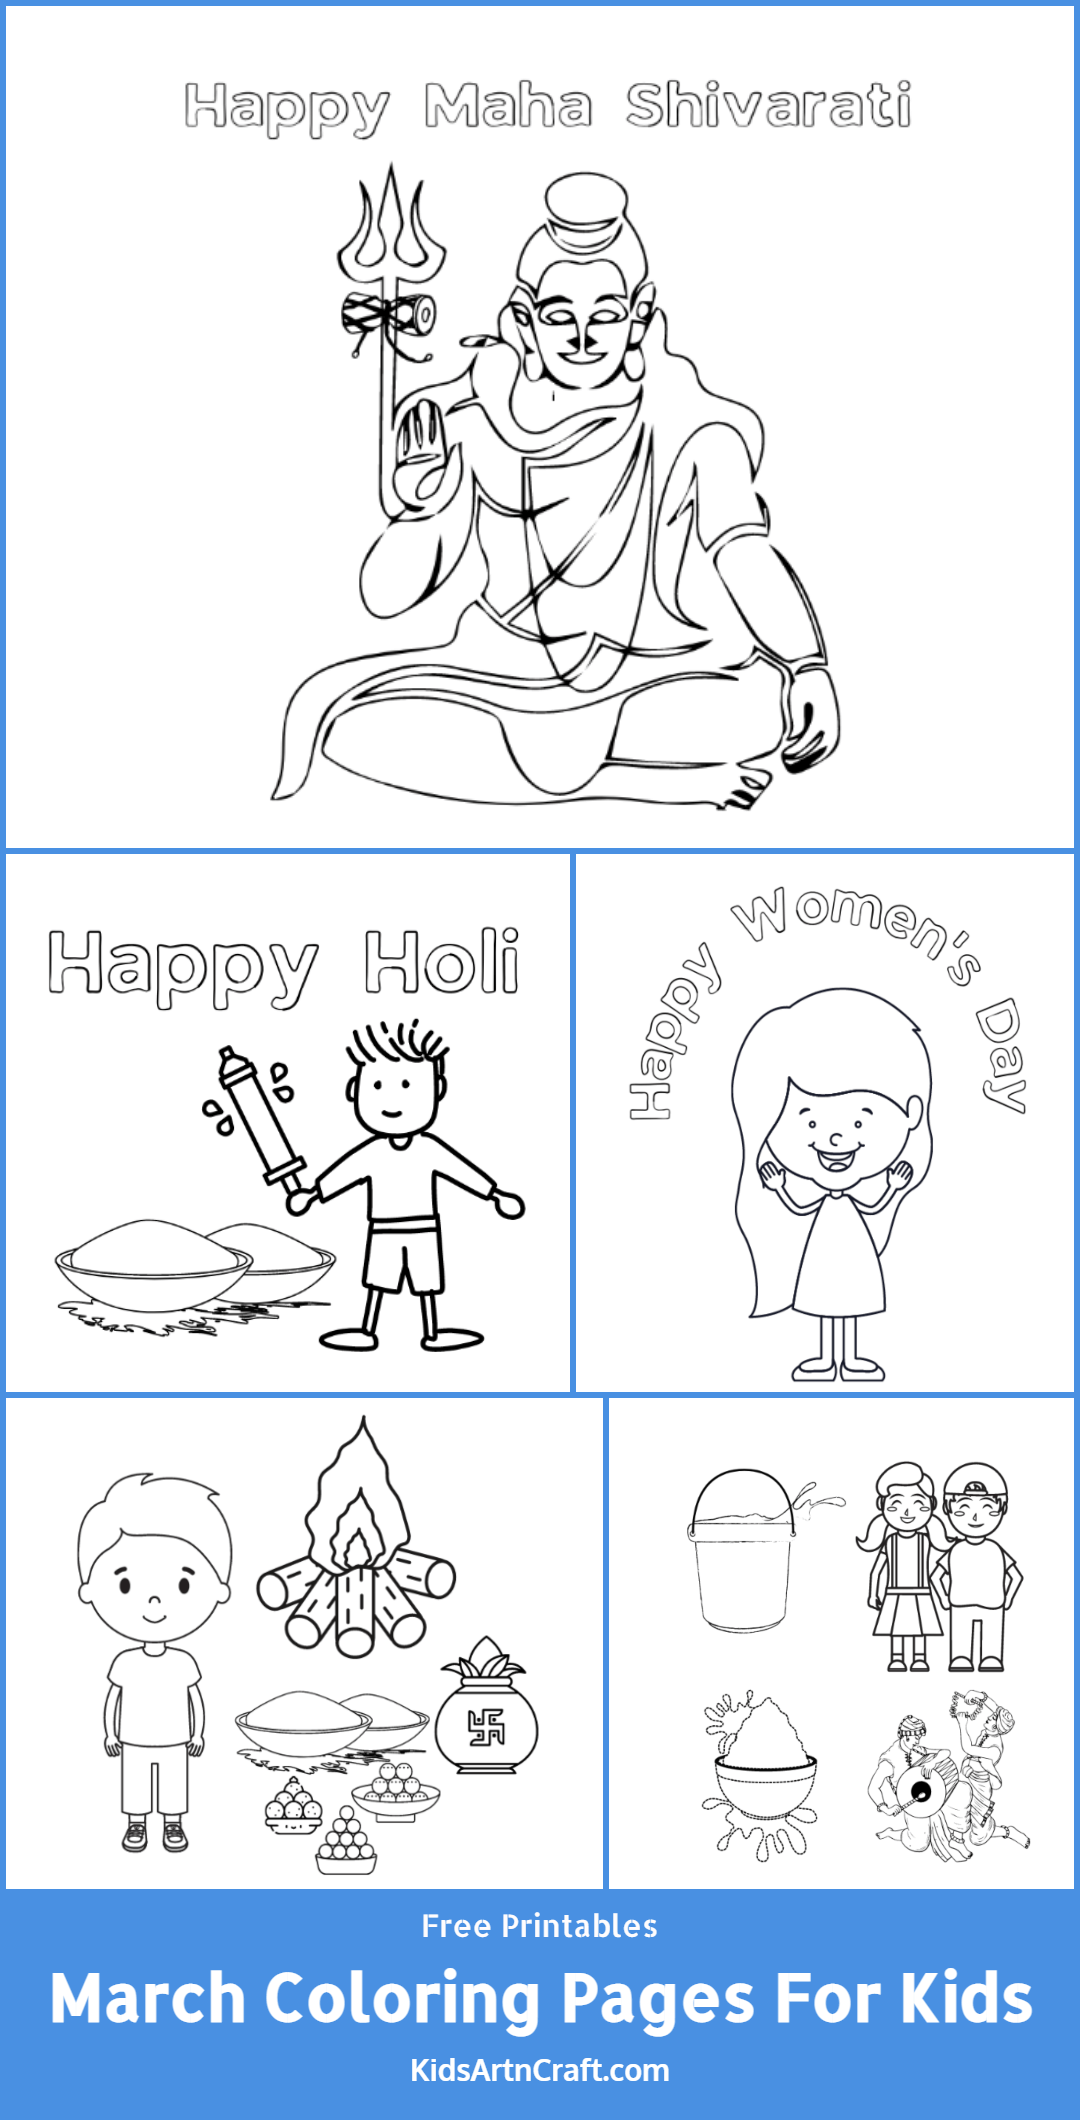 March Coloring Pages For Kids – Free Printables